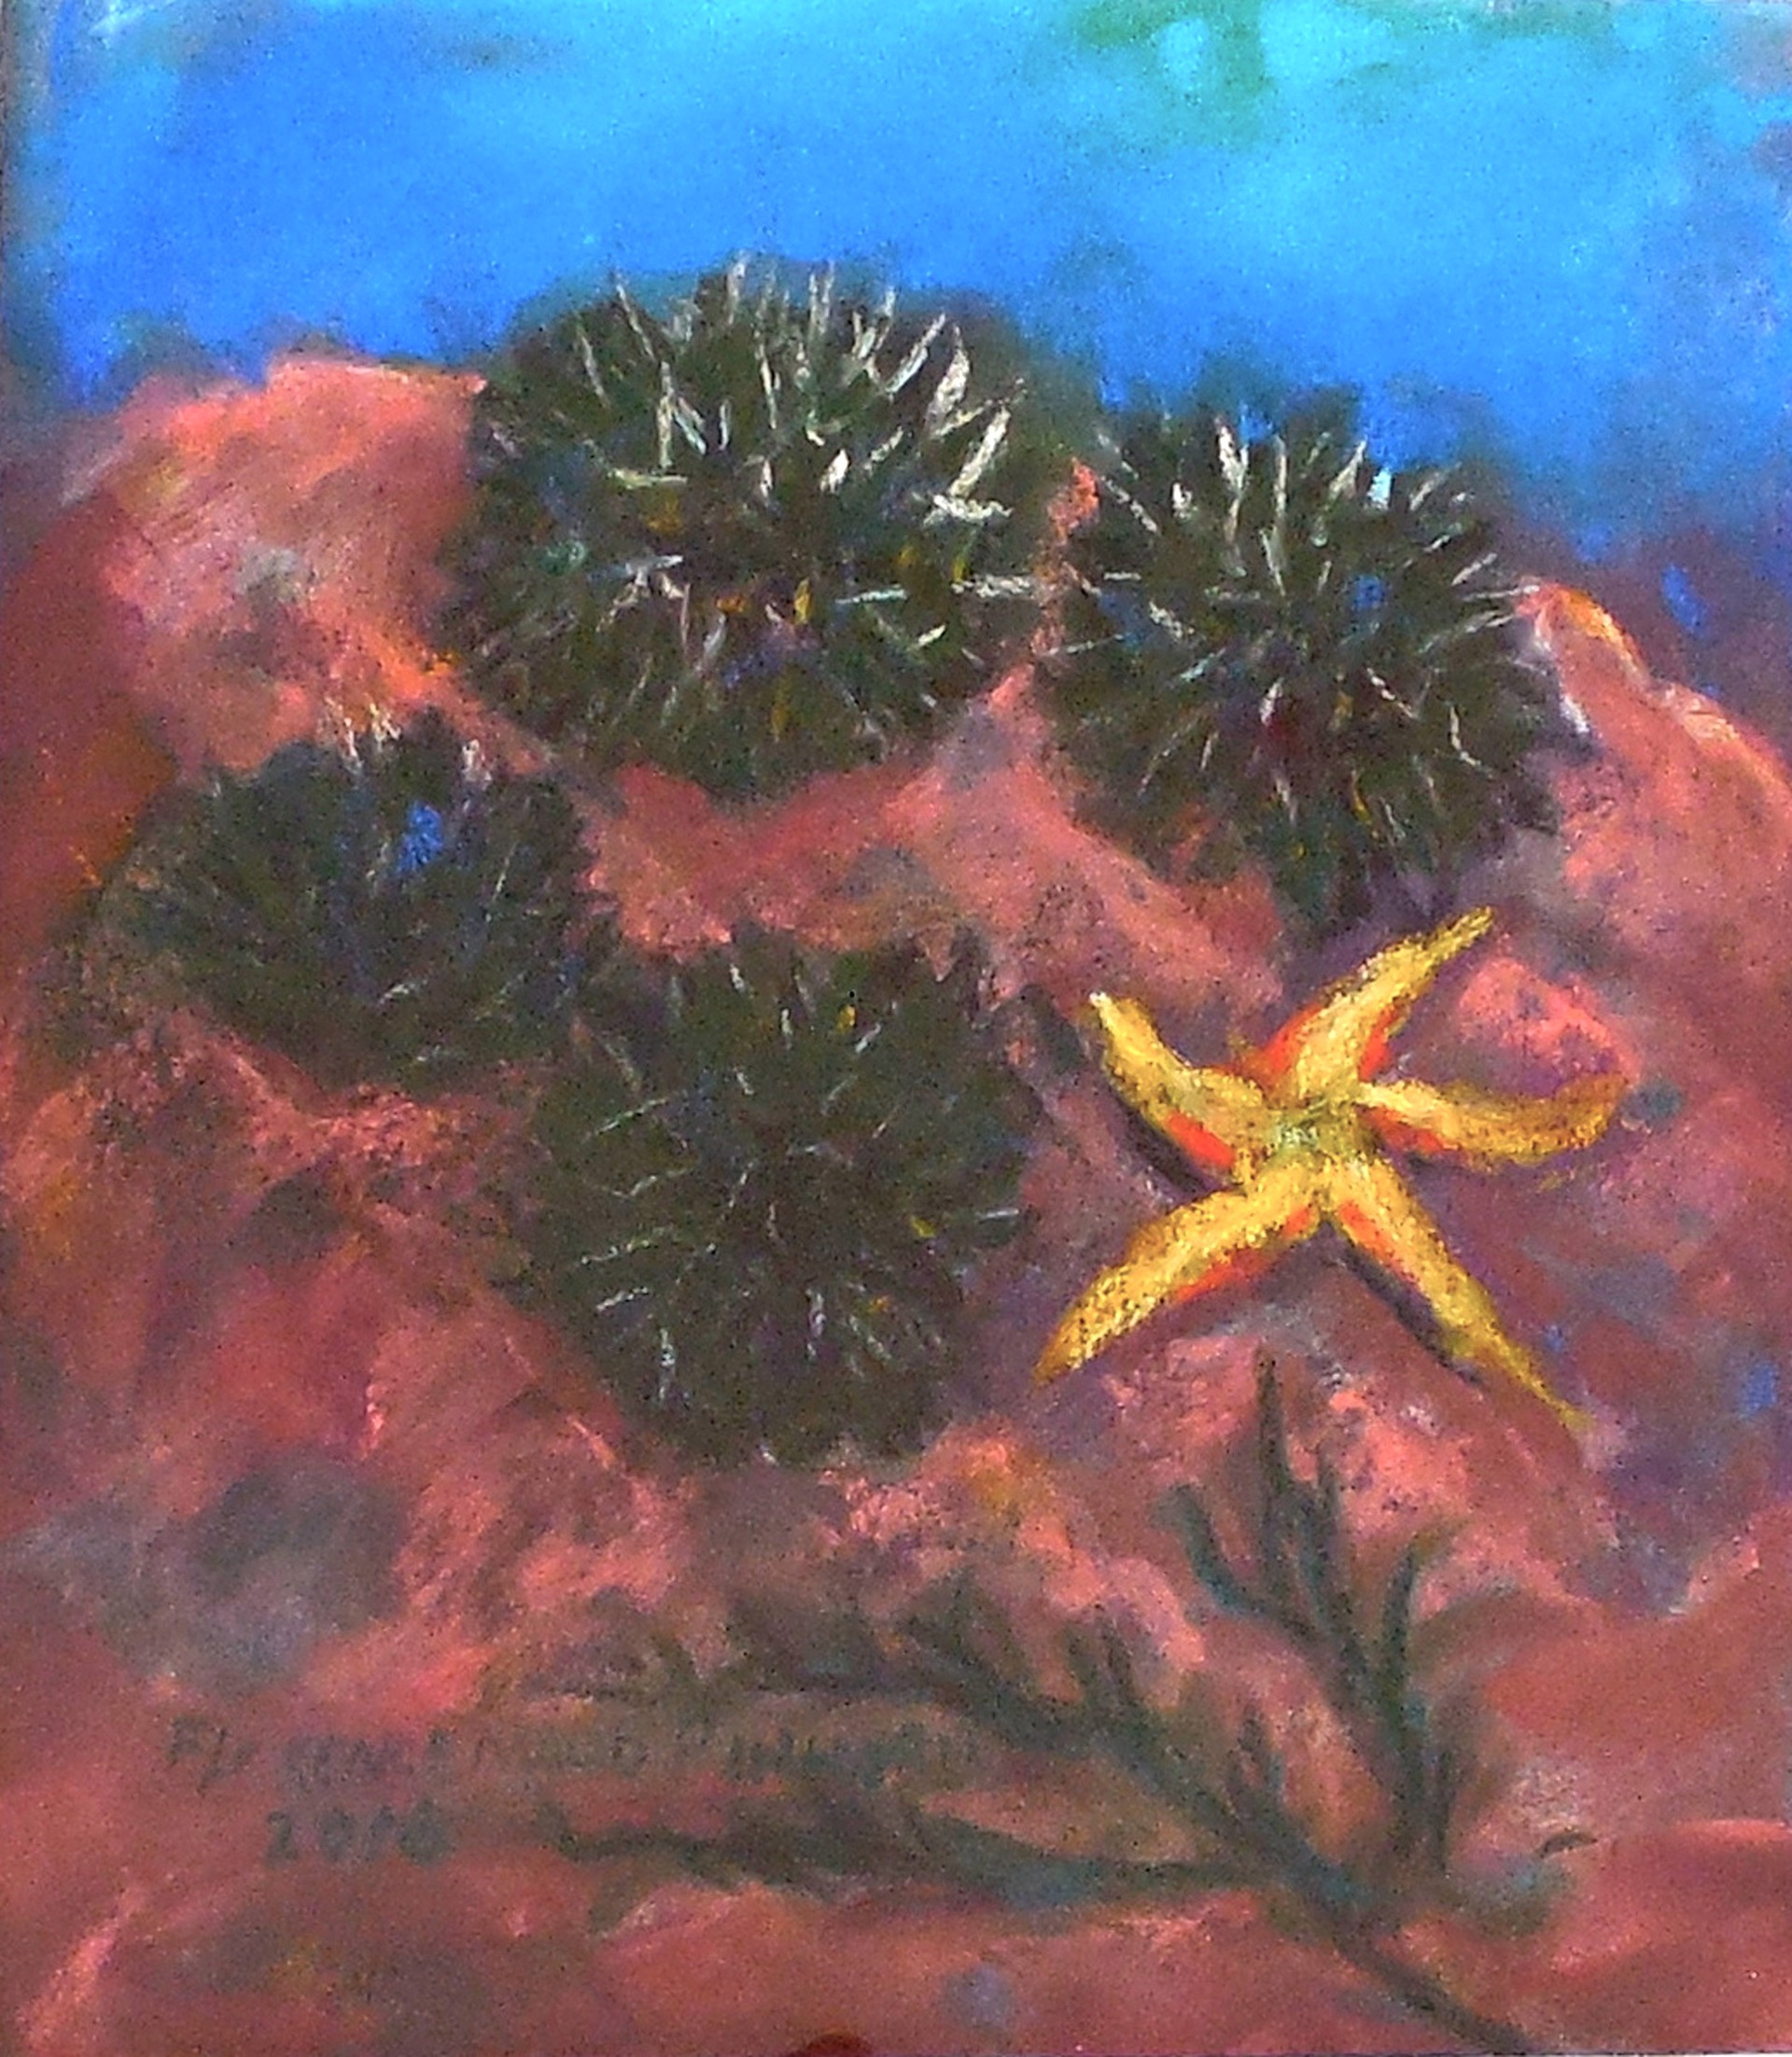 With Sea Urchins by Florence Pinhorn